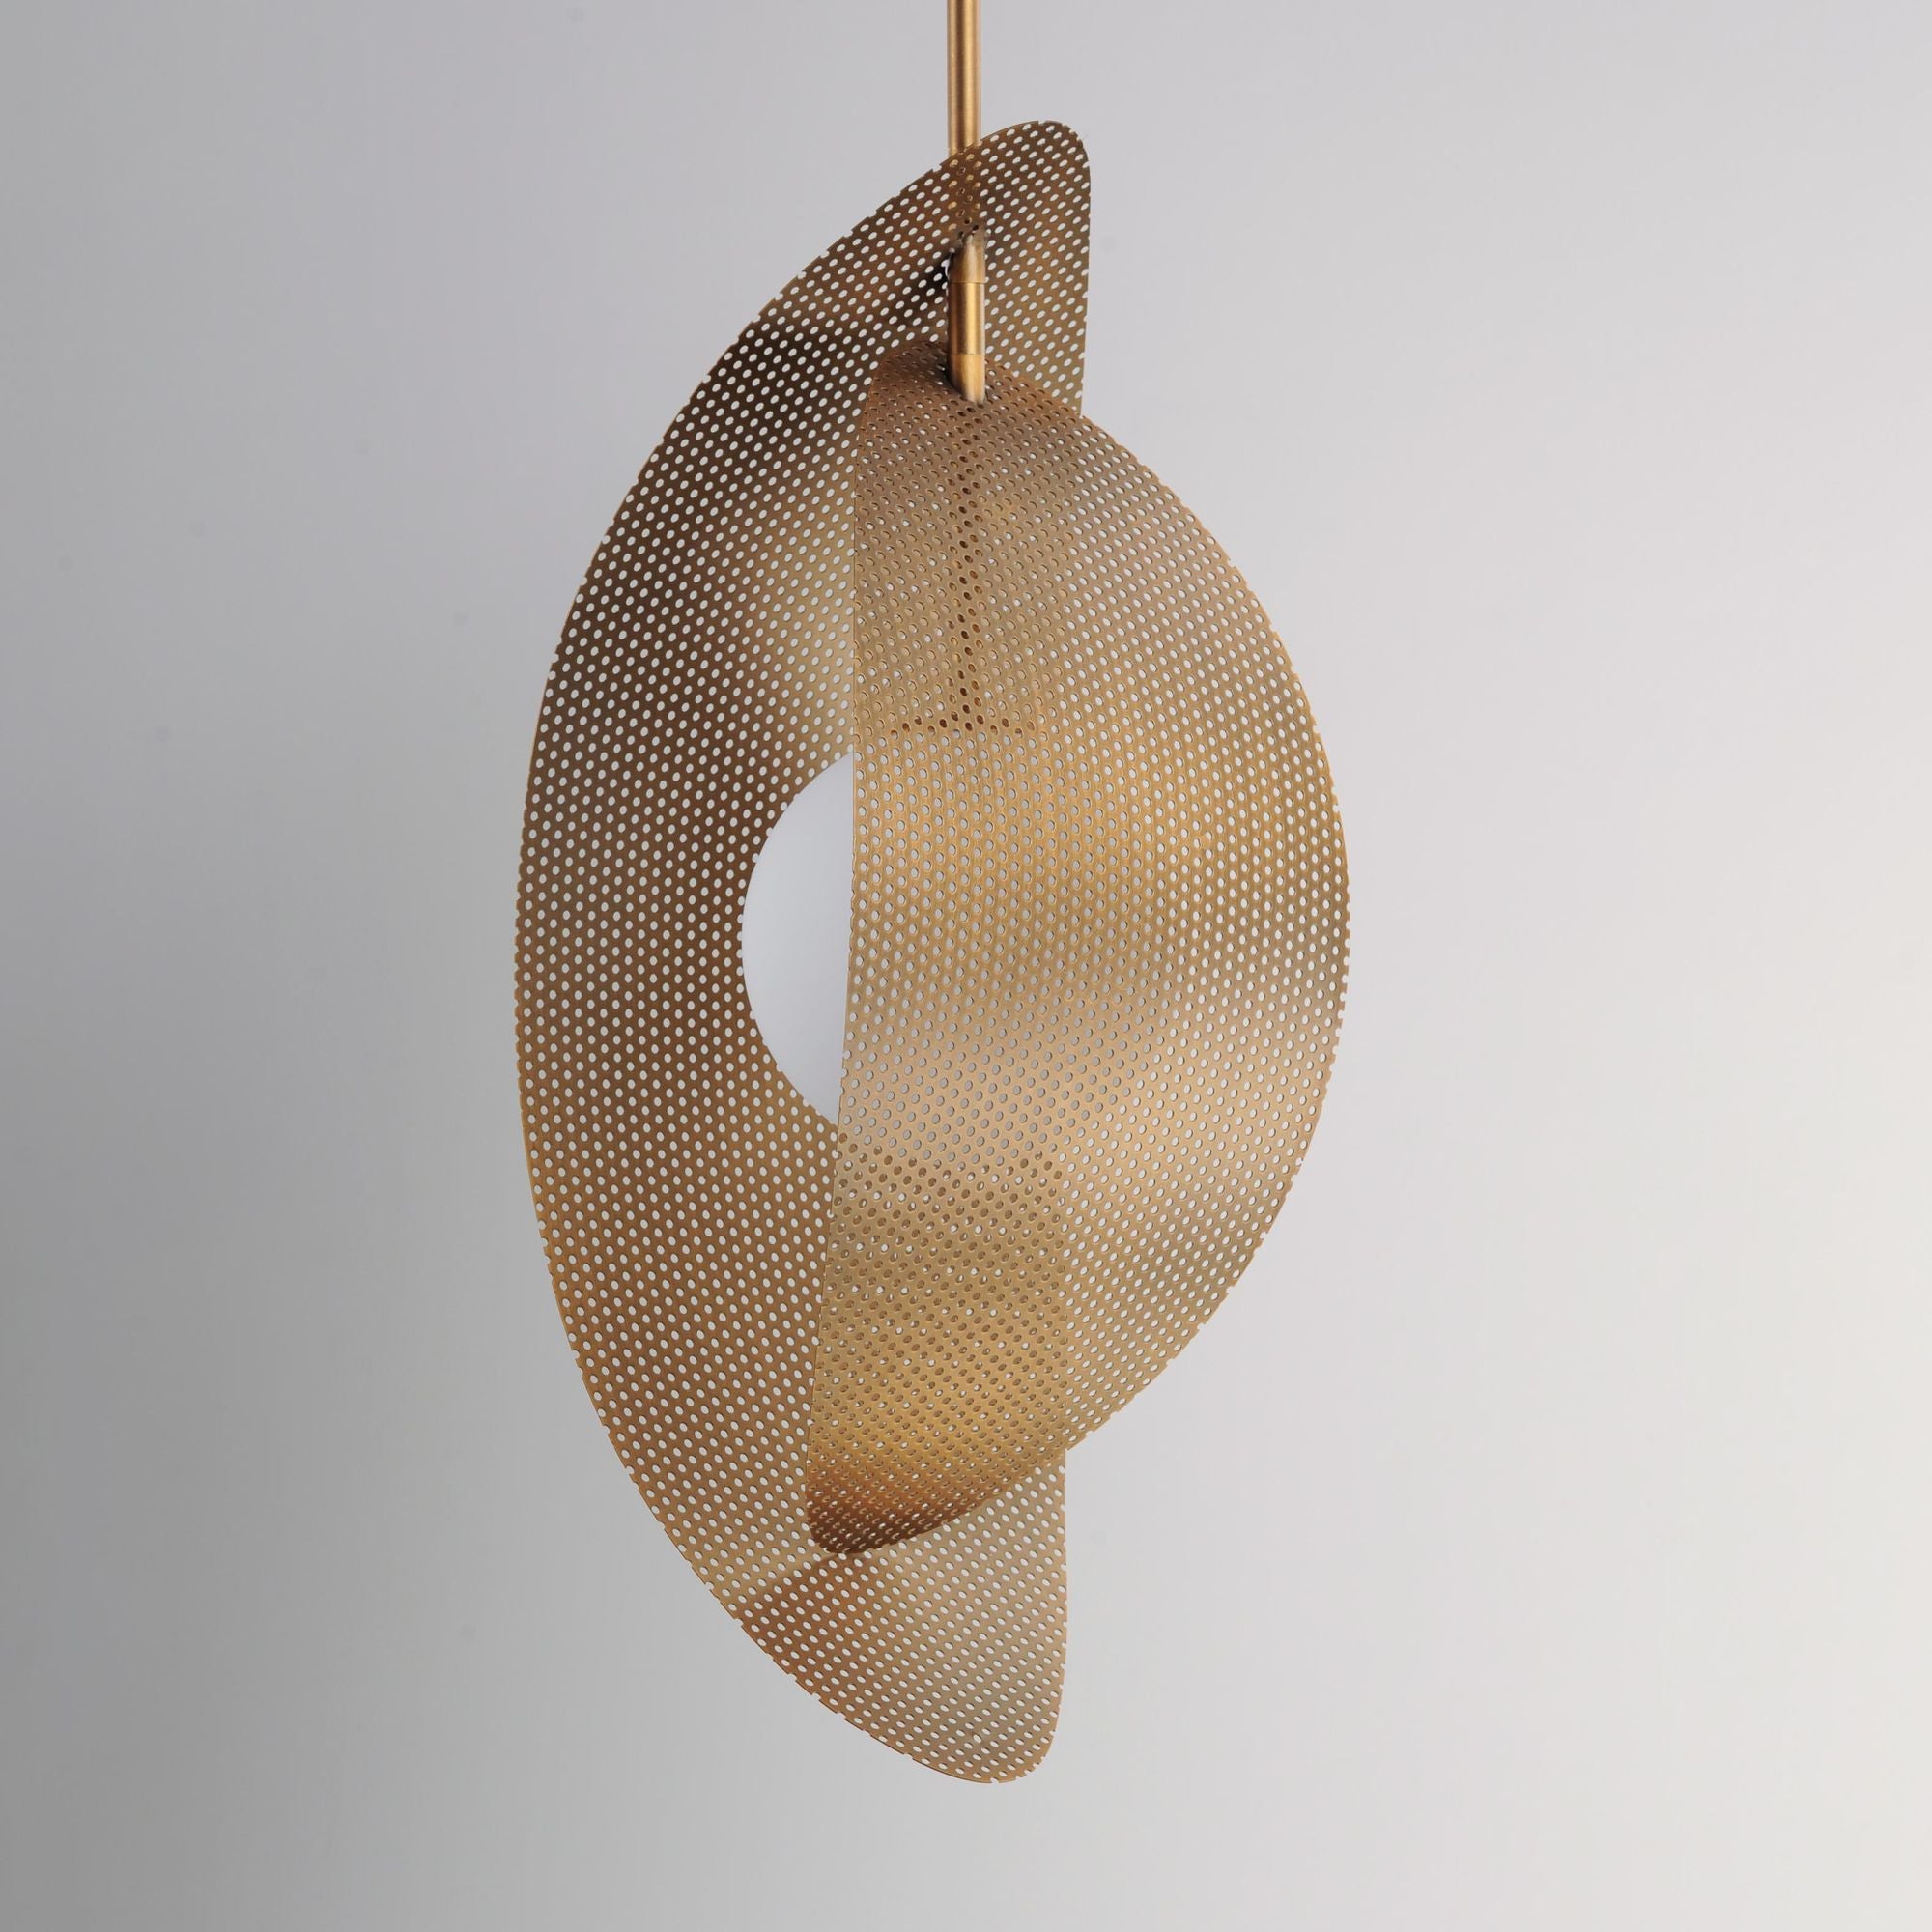 Studio M SM32361SWNAB Chips 1-Light Pendant - Brass in Natural Aged Brass by Mat Sanders